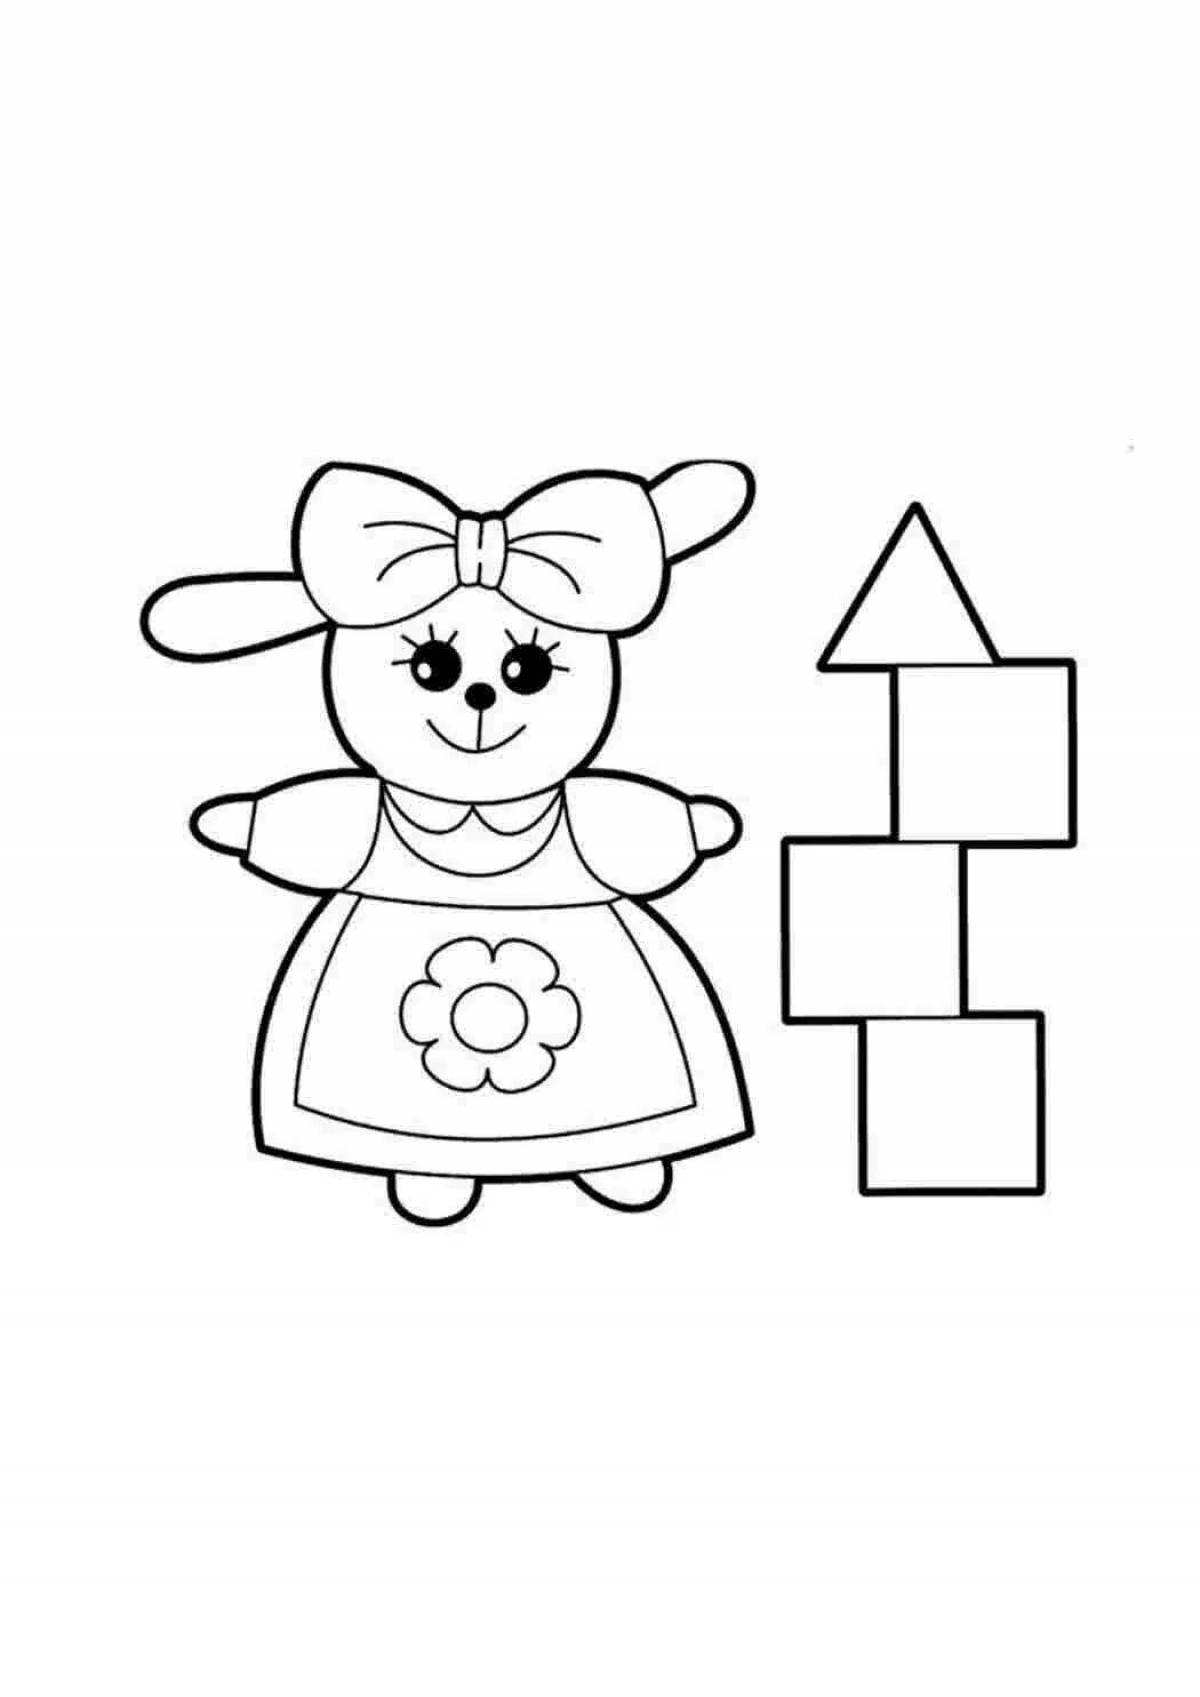 Fun coloring game for girls 3 years old